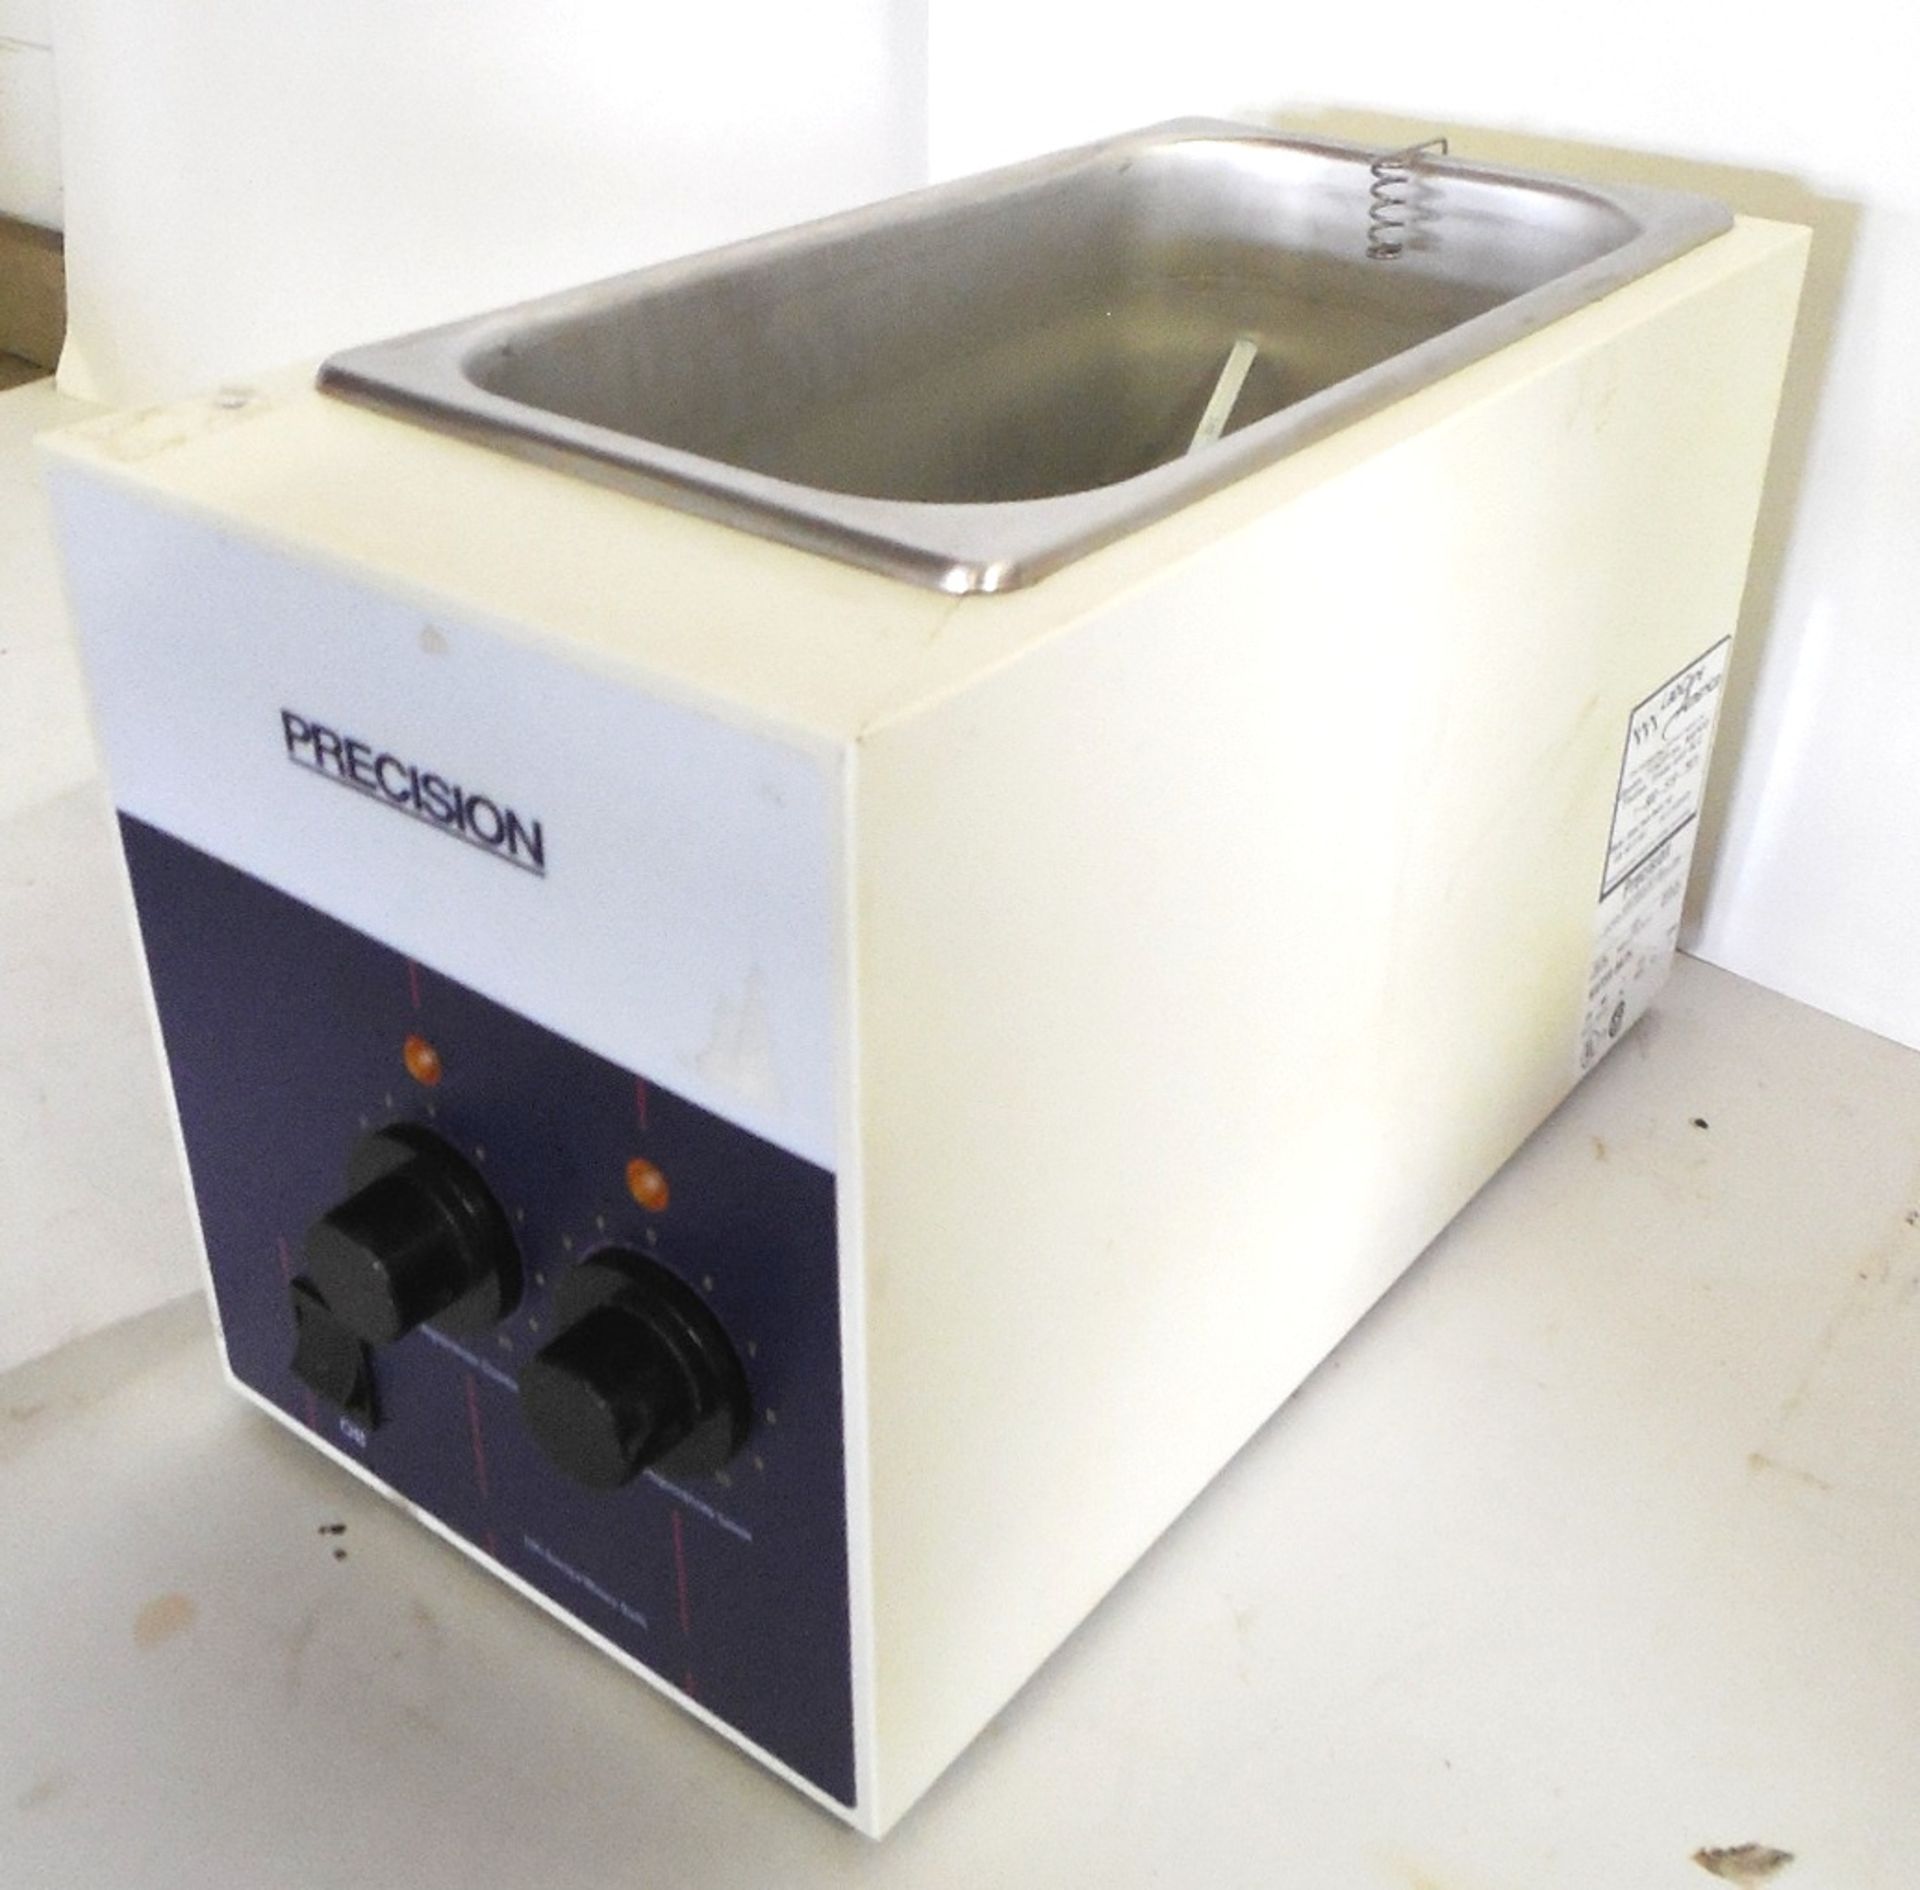 PRECISION SERIES 182 WATER BATH - Image 2 of 2